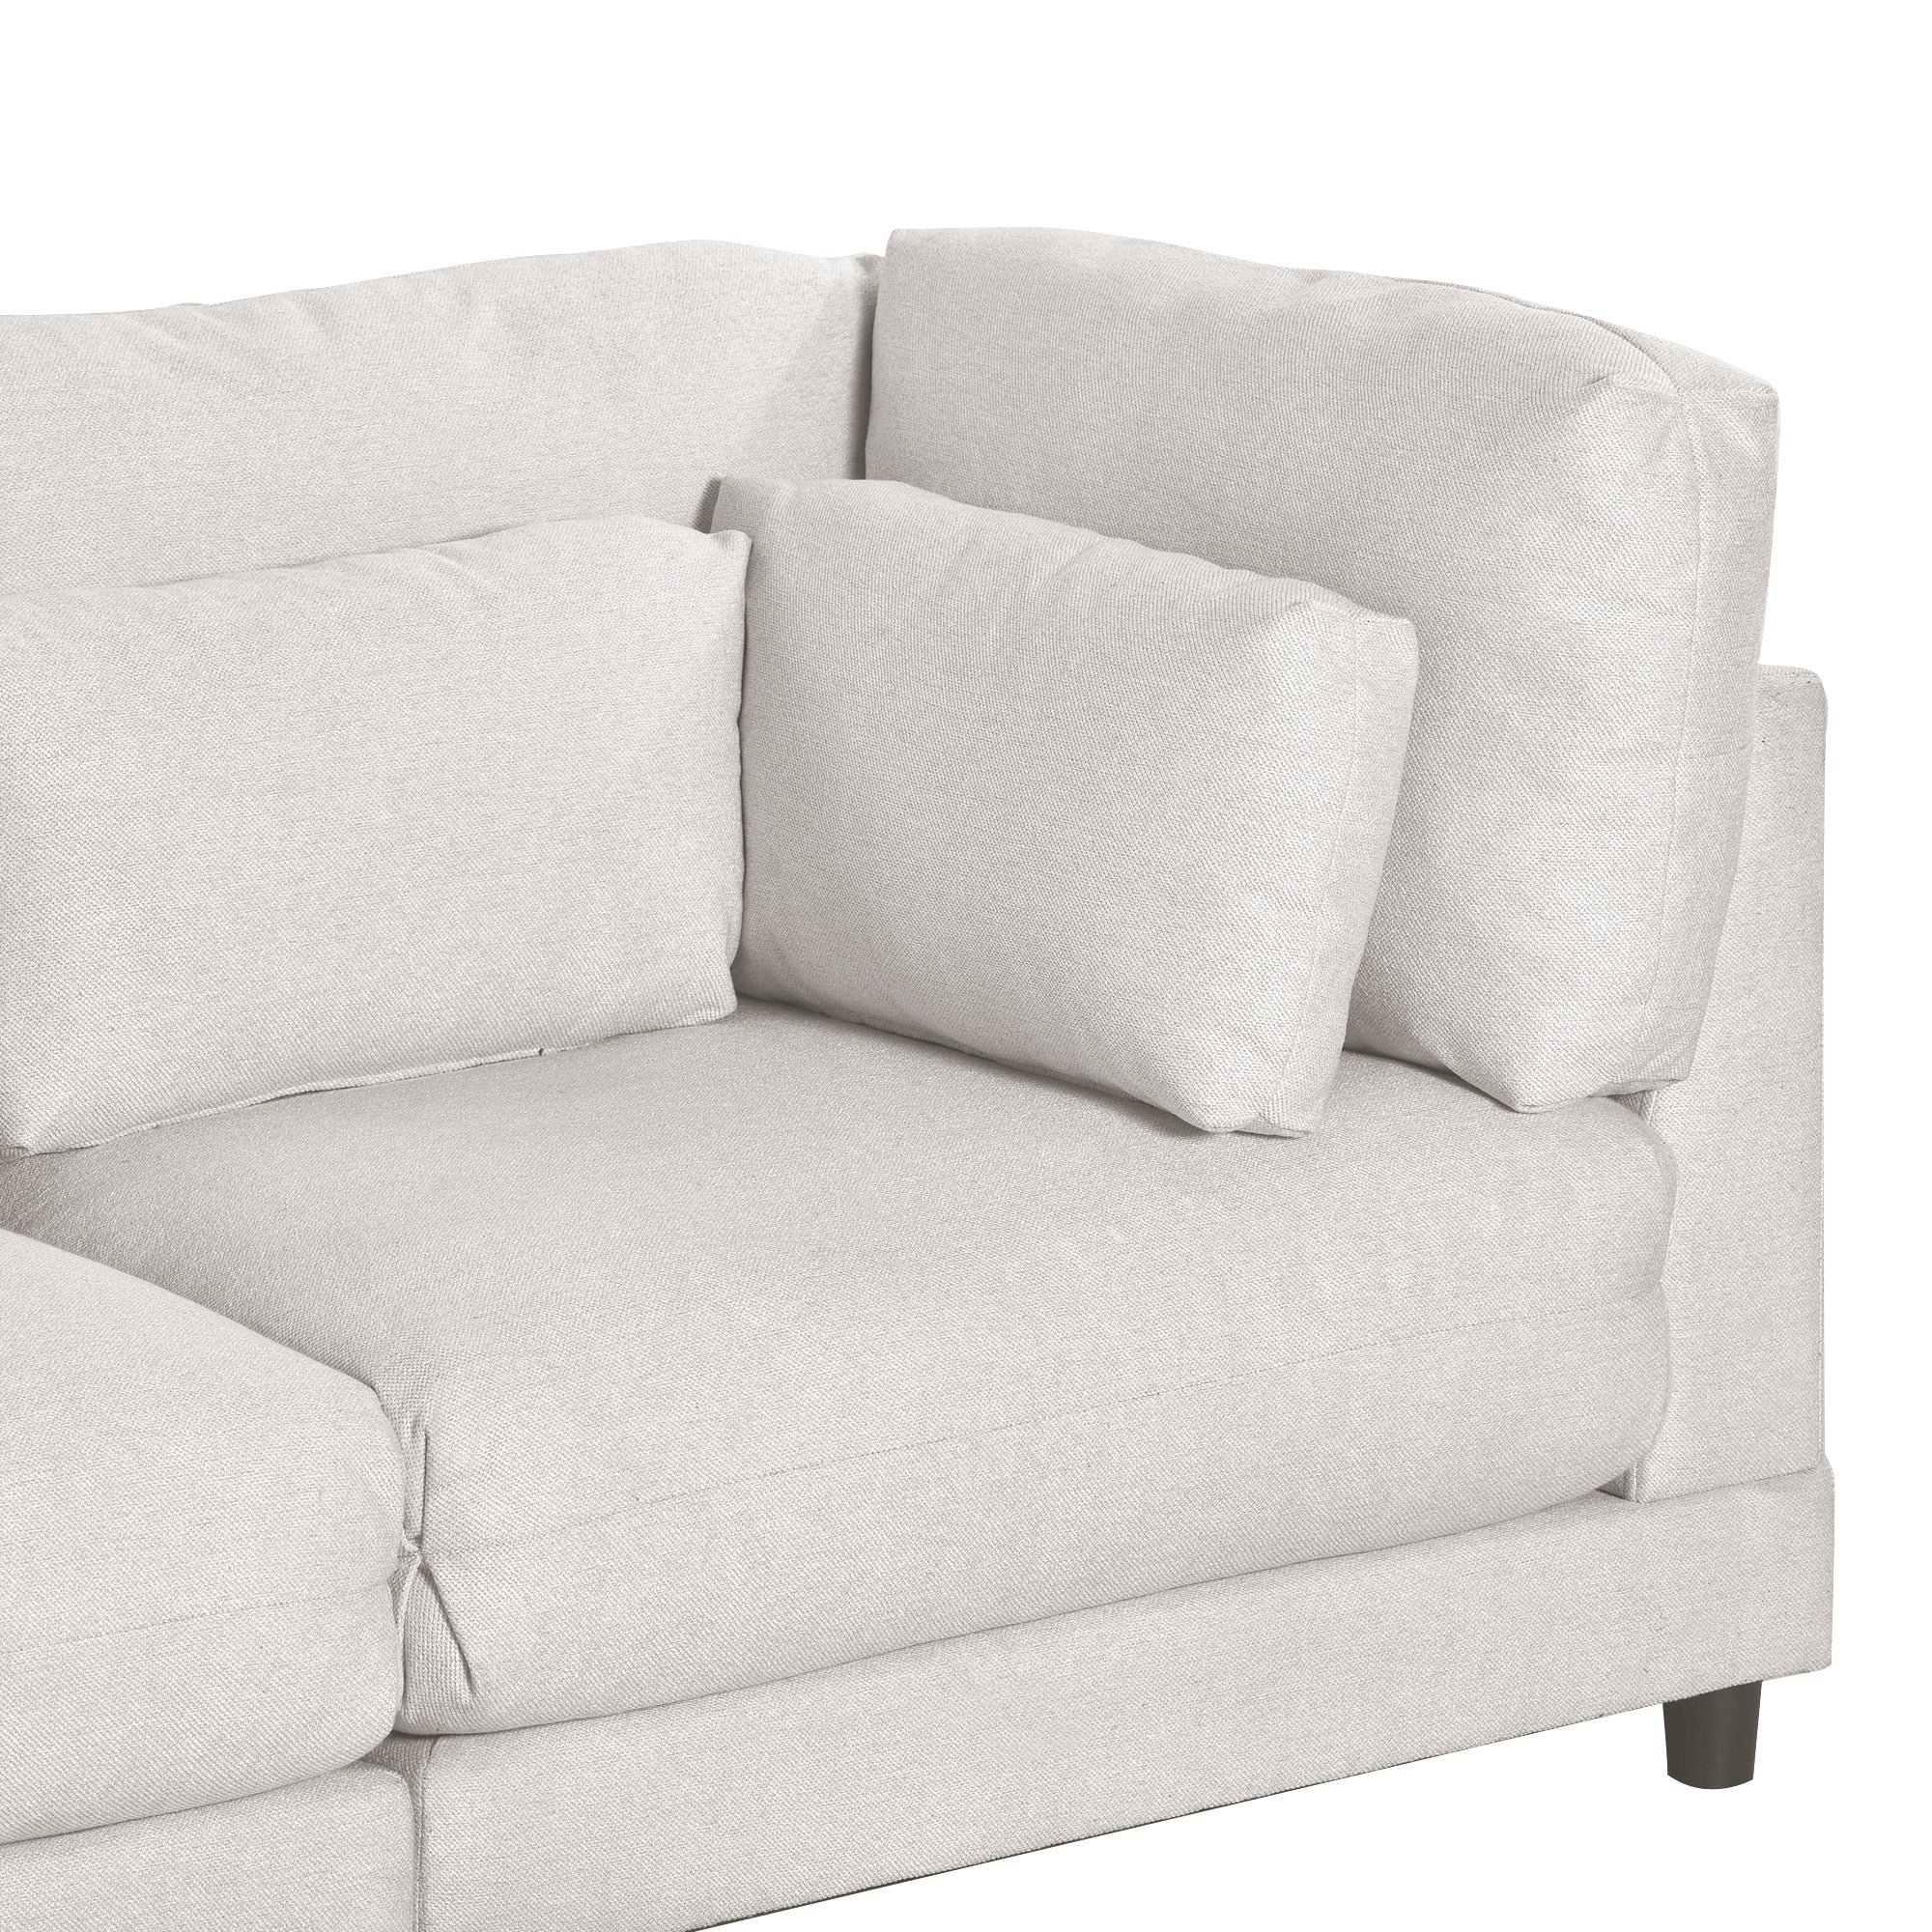 L-Shape Sectional Sofa w/ Removable Ottomans & Pillows Beige-Stationary Sectionals-American Furniture Outlet